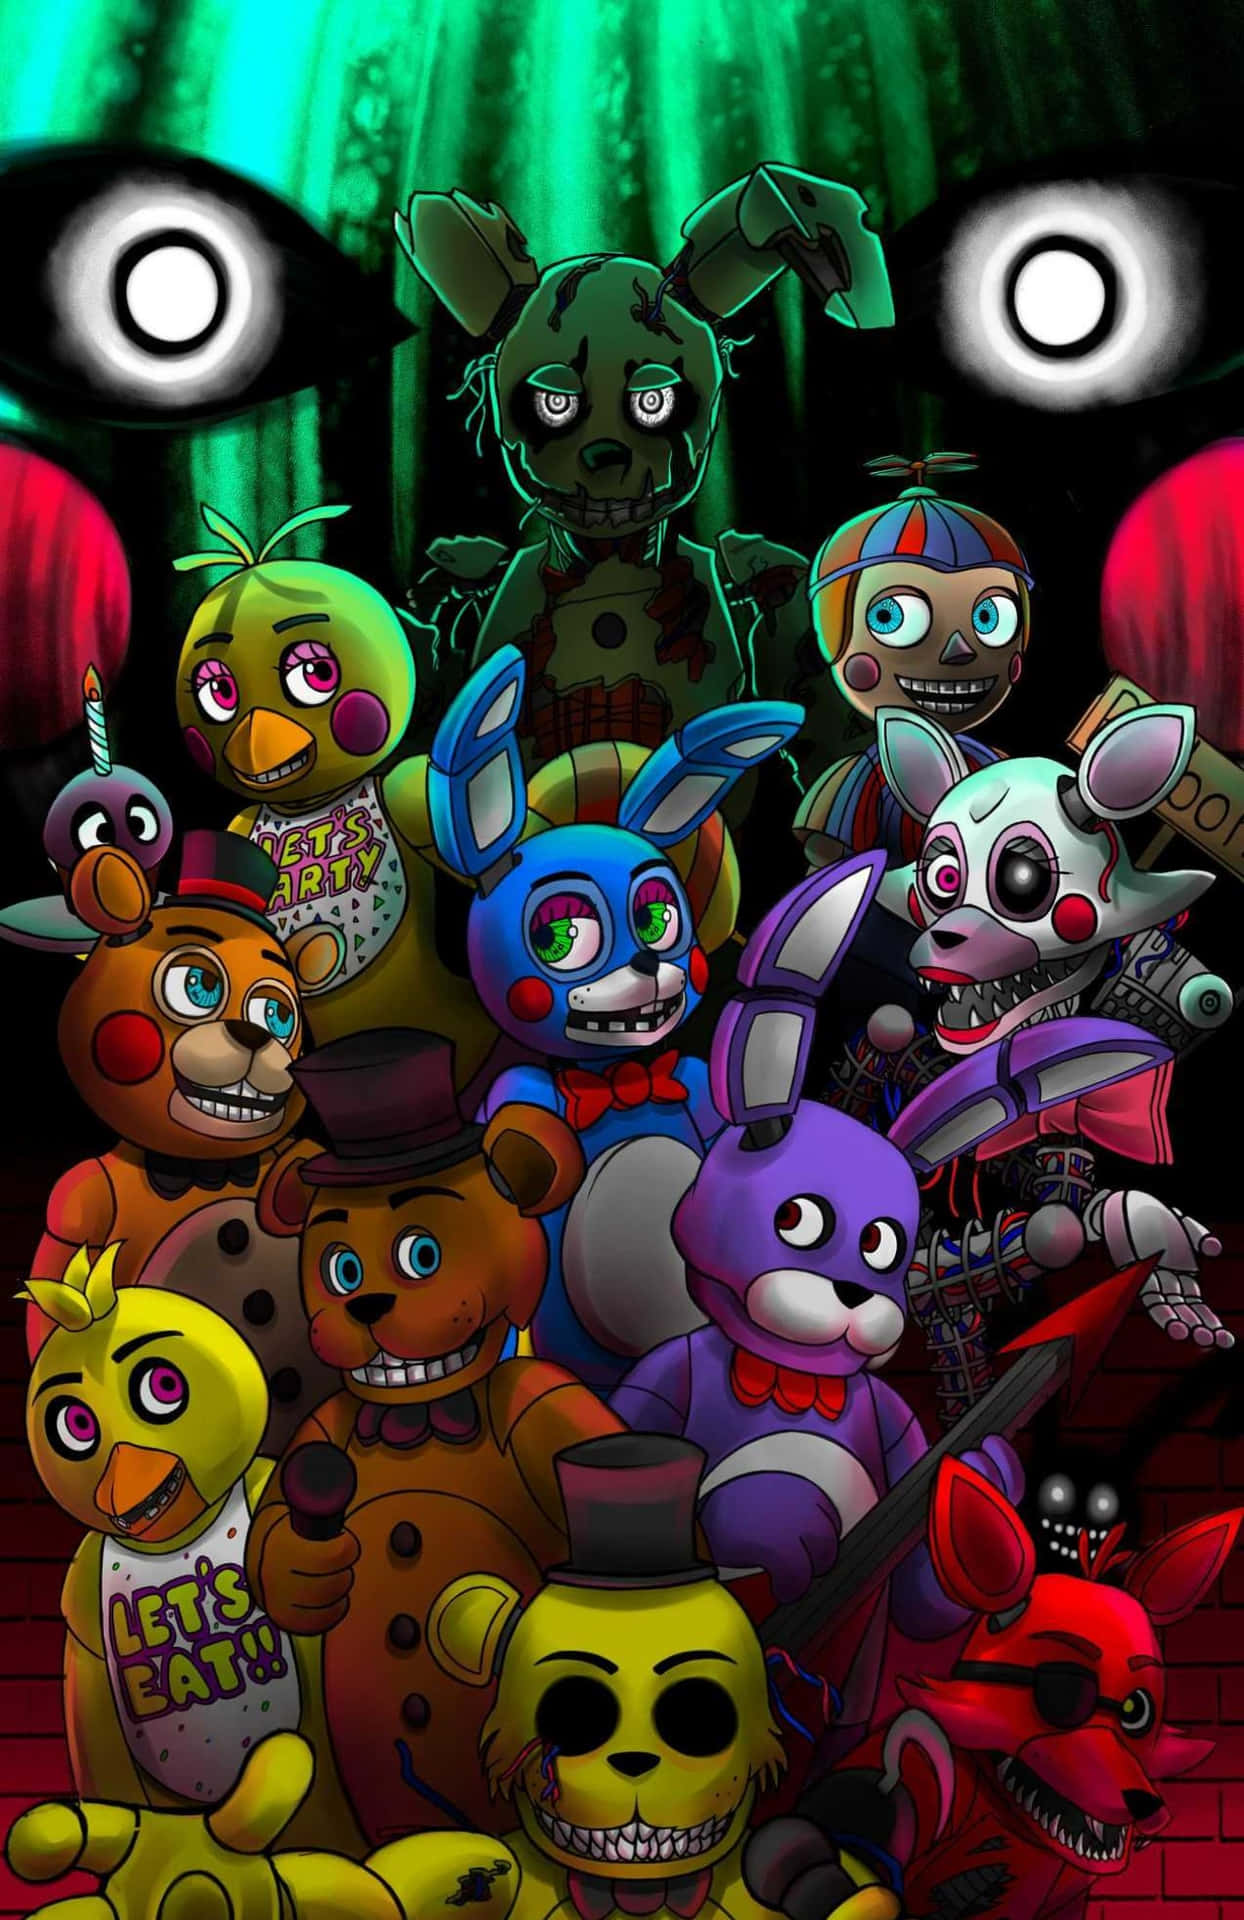 Surviving a night with Five Nights at Freddy’s characters